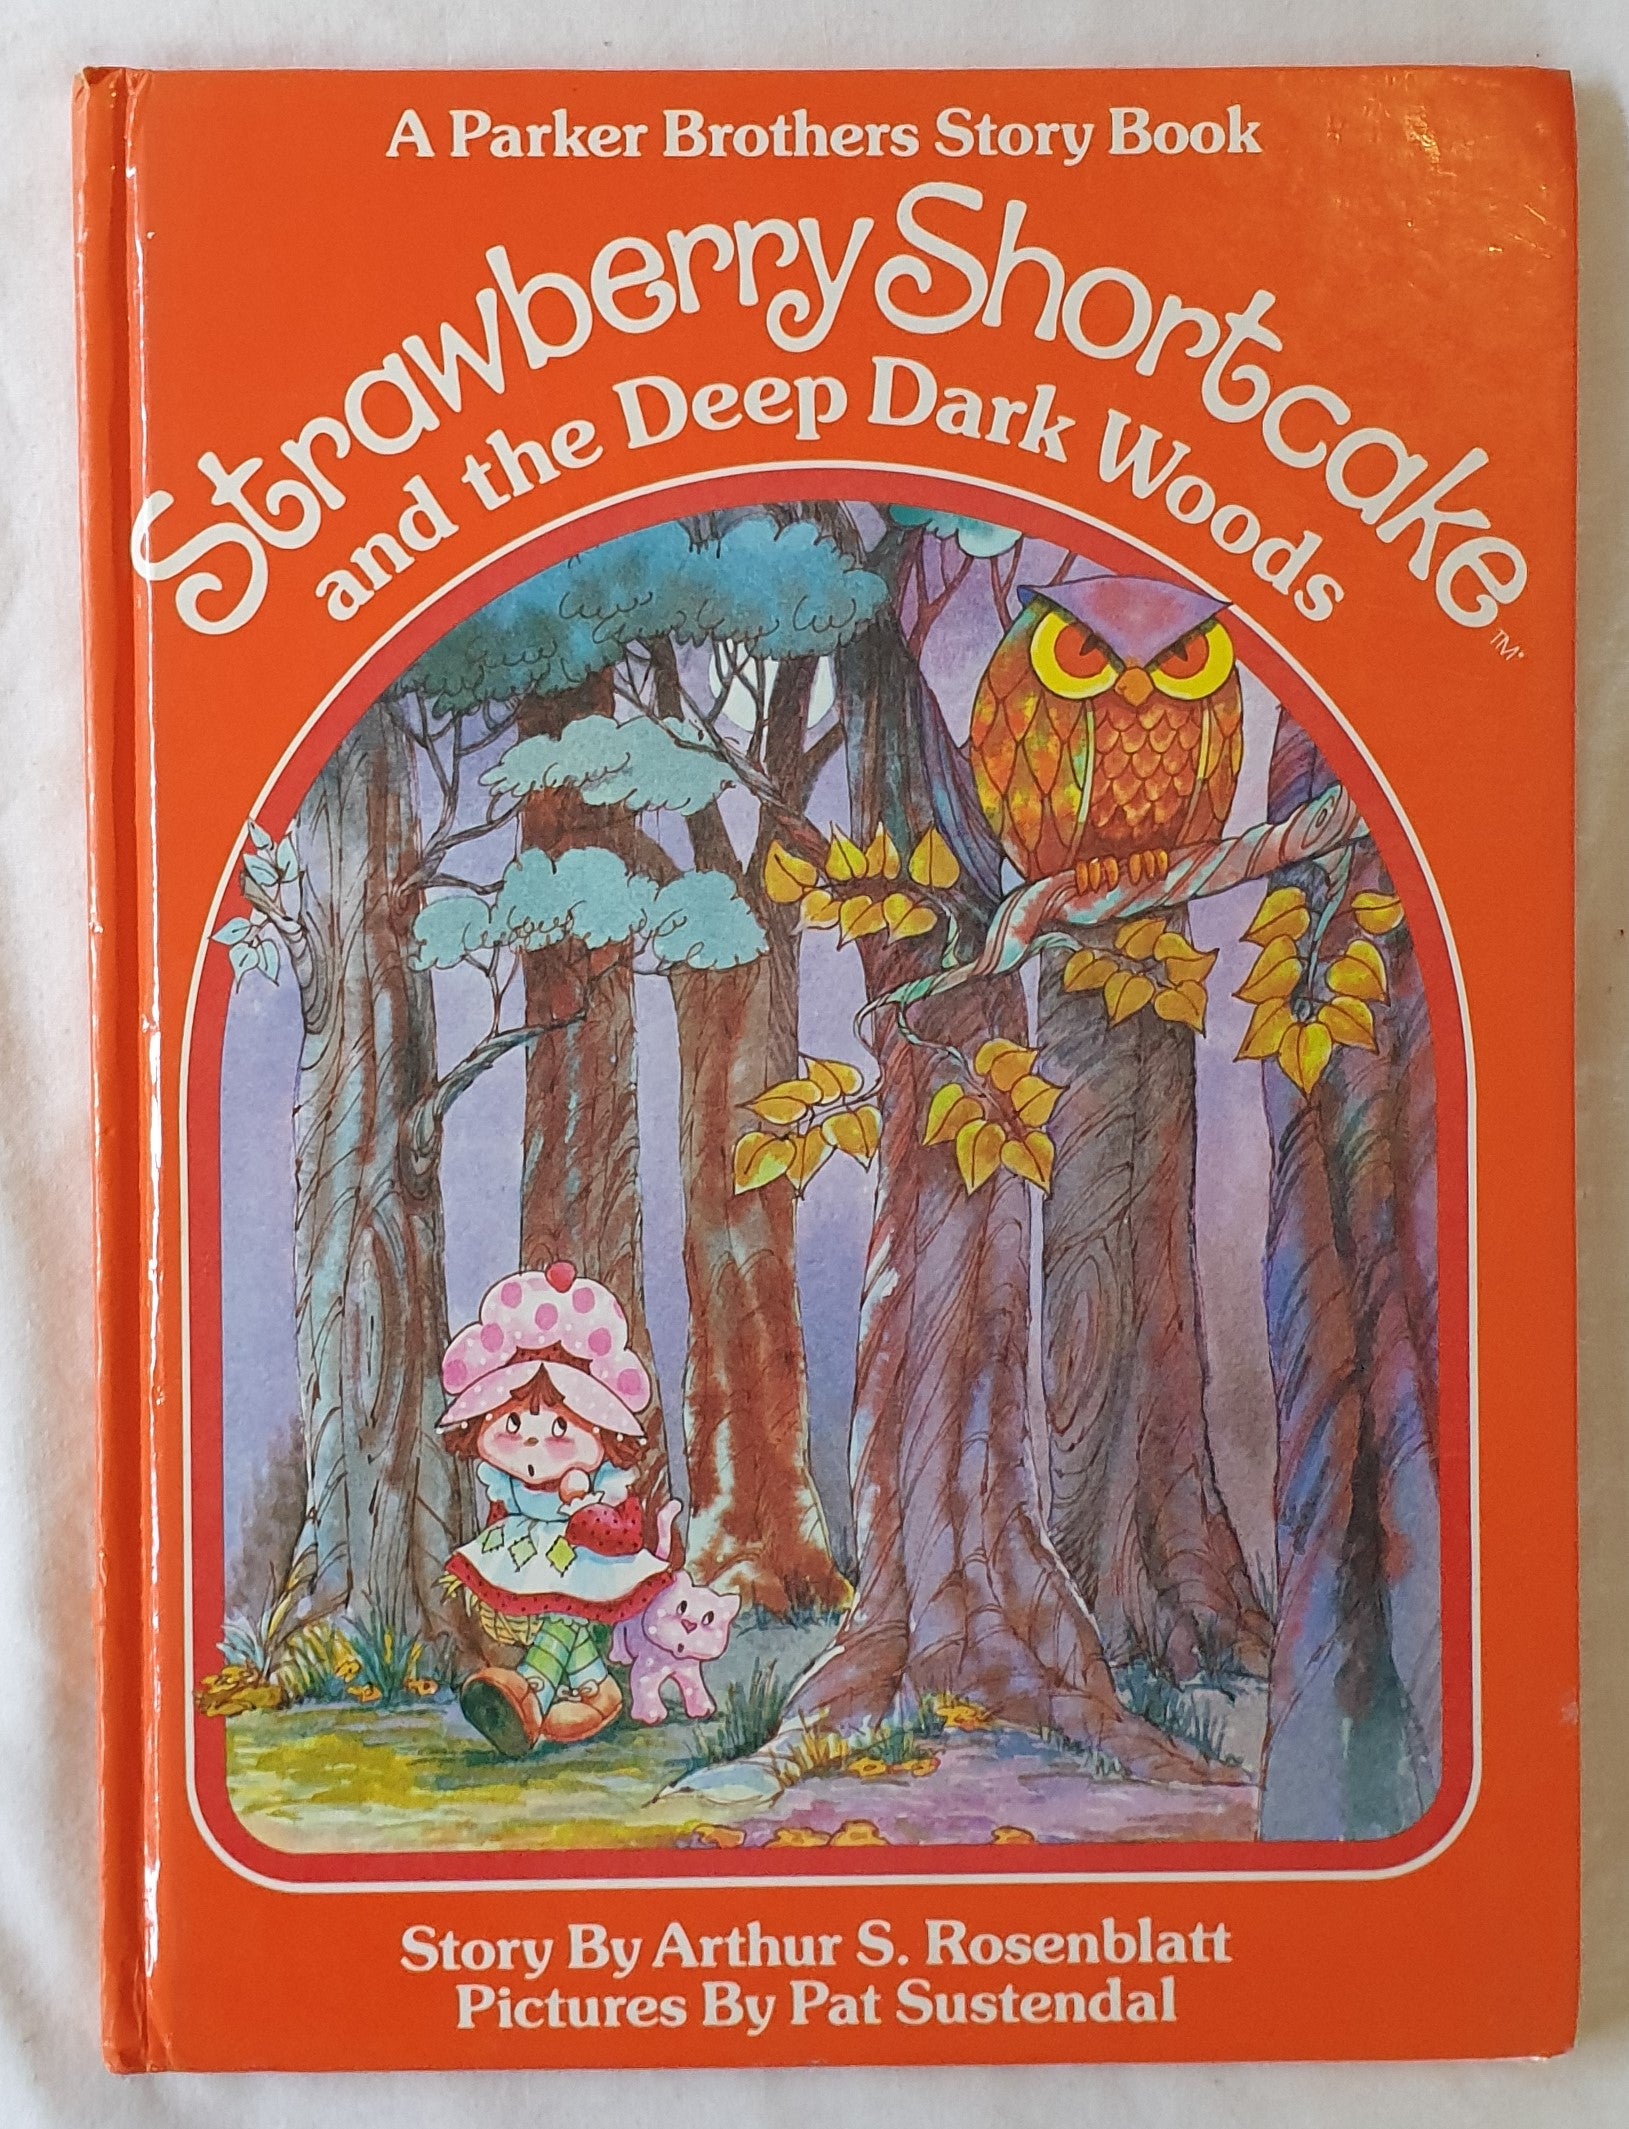 Strawberry Shortcake and the Deep Dark Woods  by Arthur S. Rosenblatt  Pictures by Pat Sustendal